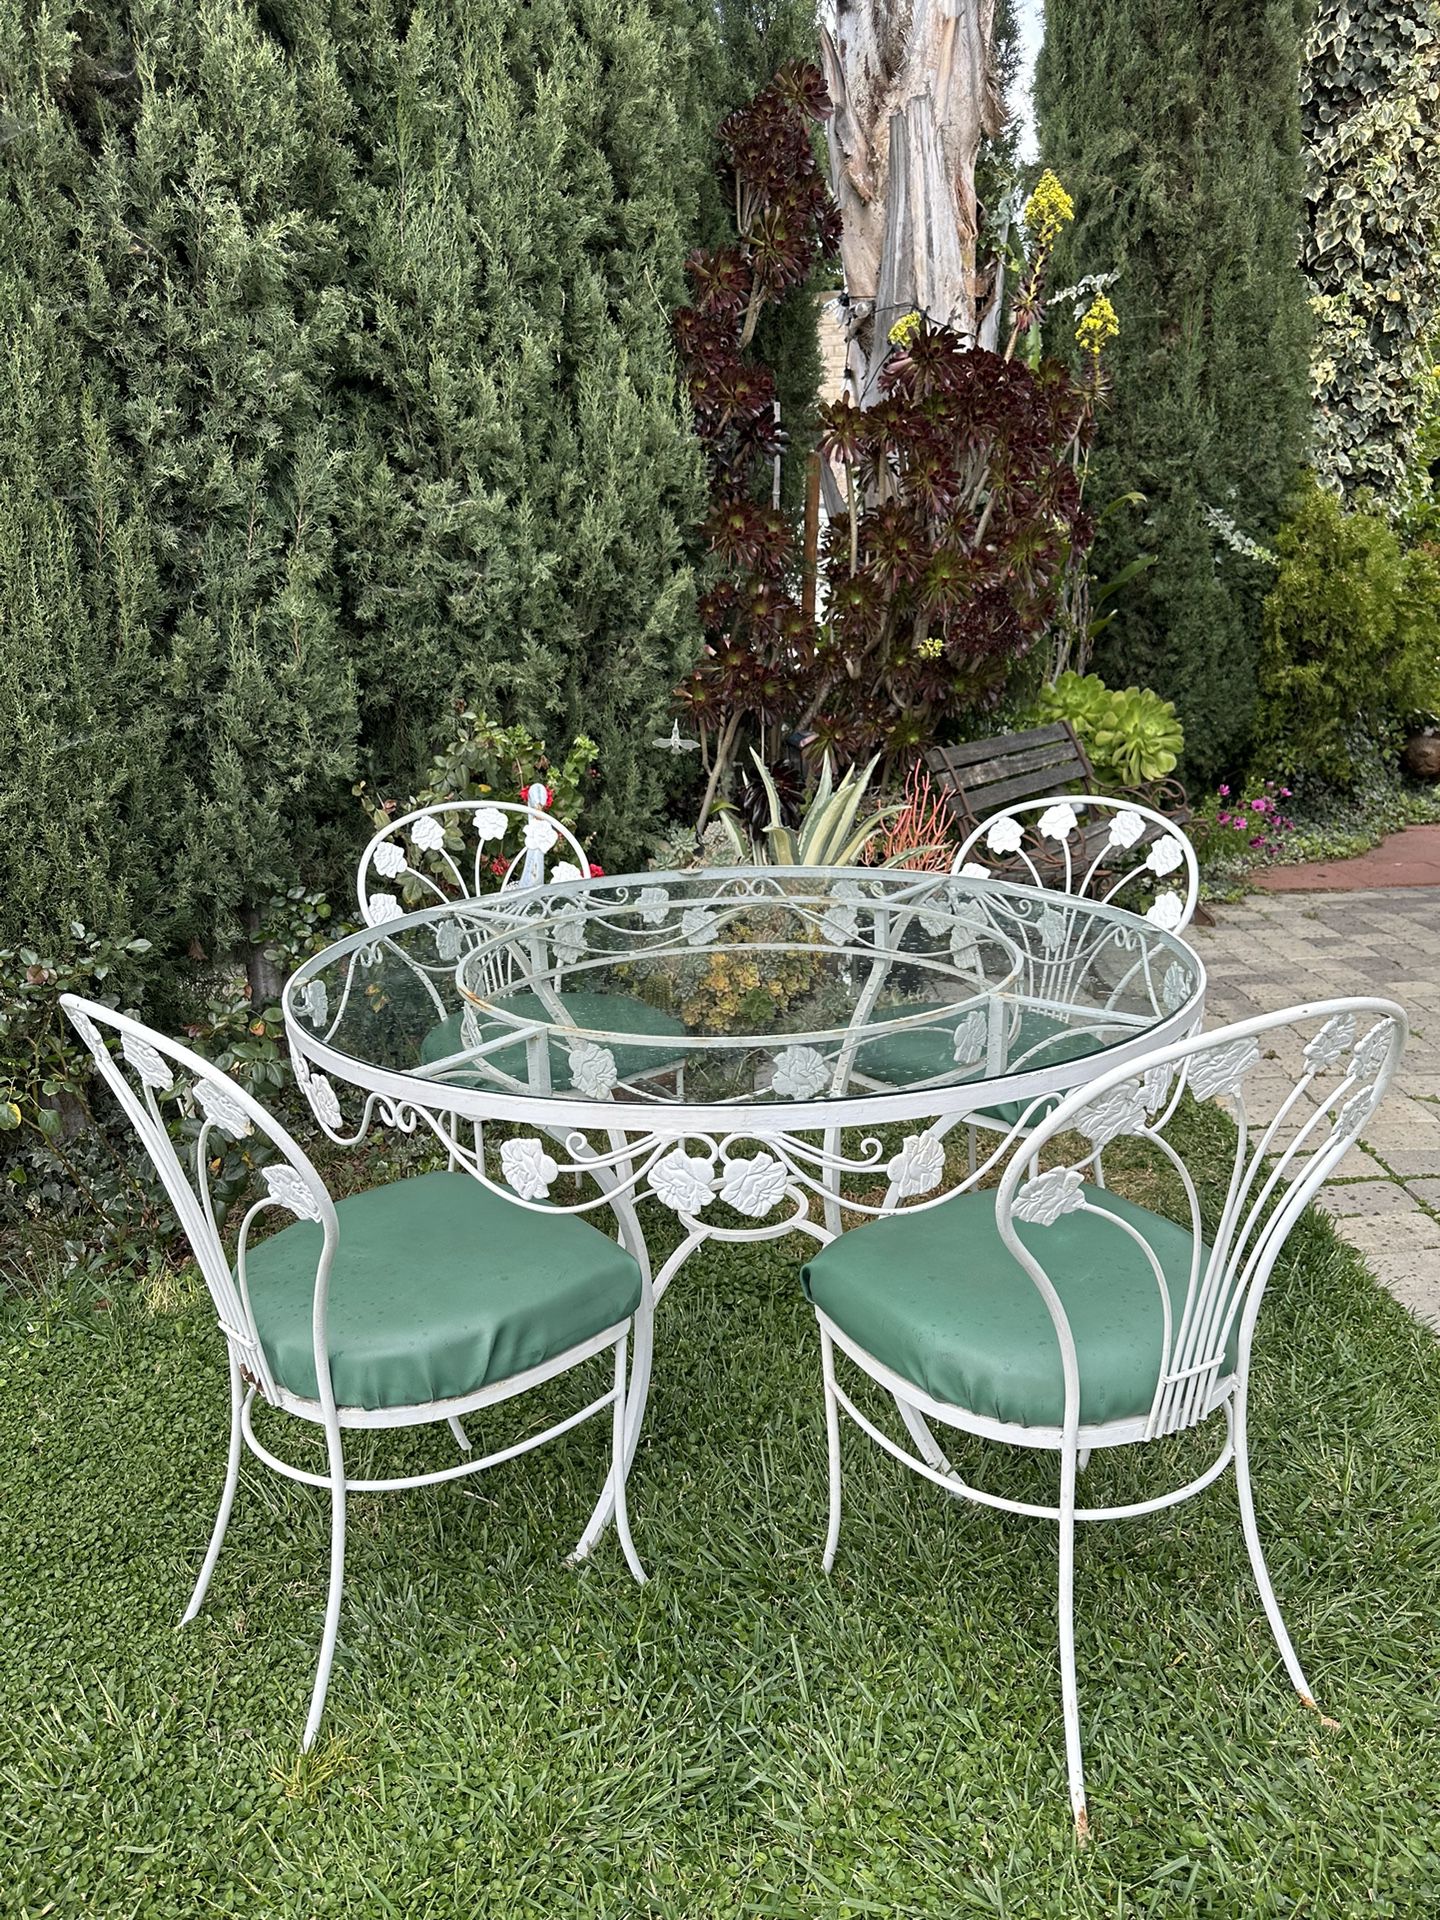 Vintage Russel Woodard Wrought Iron Patio Furniture Table Set. Delivery Available For Extra Fee. 